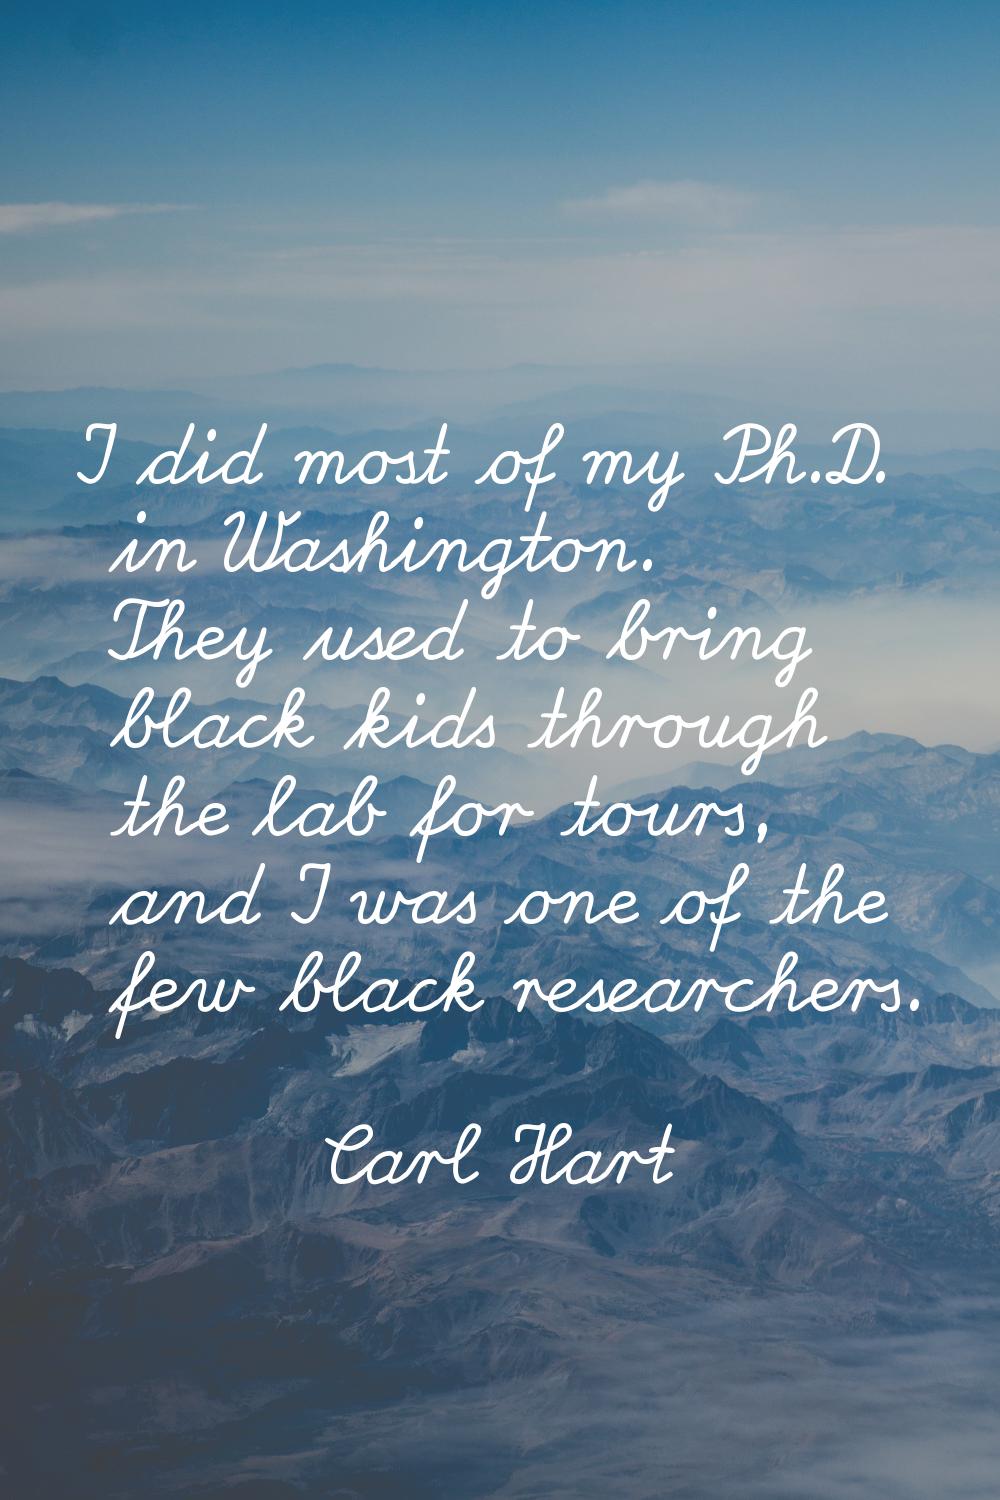 I did most of my Ph.D. in Washington. They used to bring black kids through the lab for tours, and 